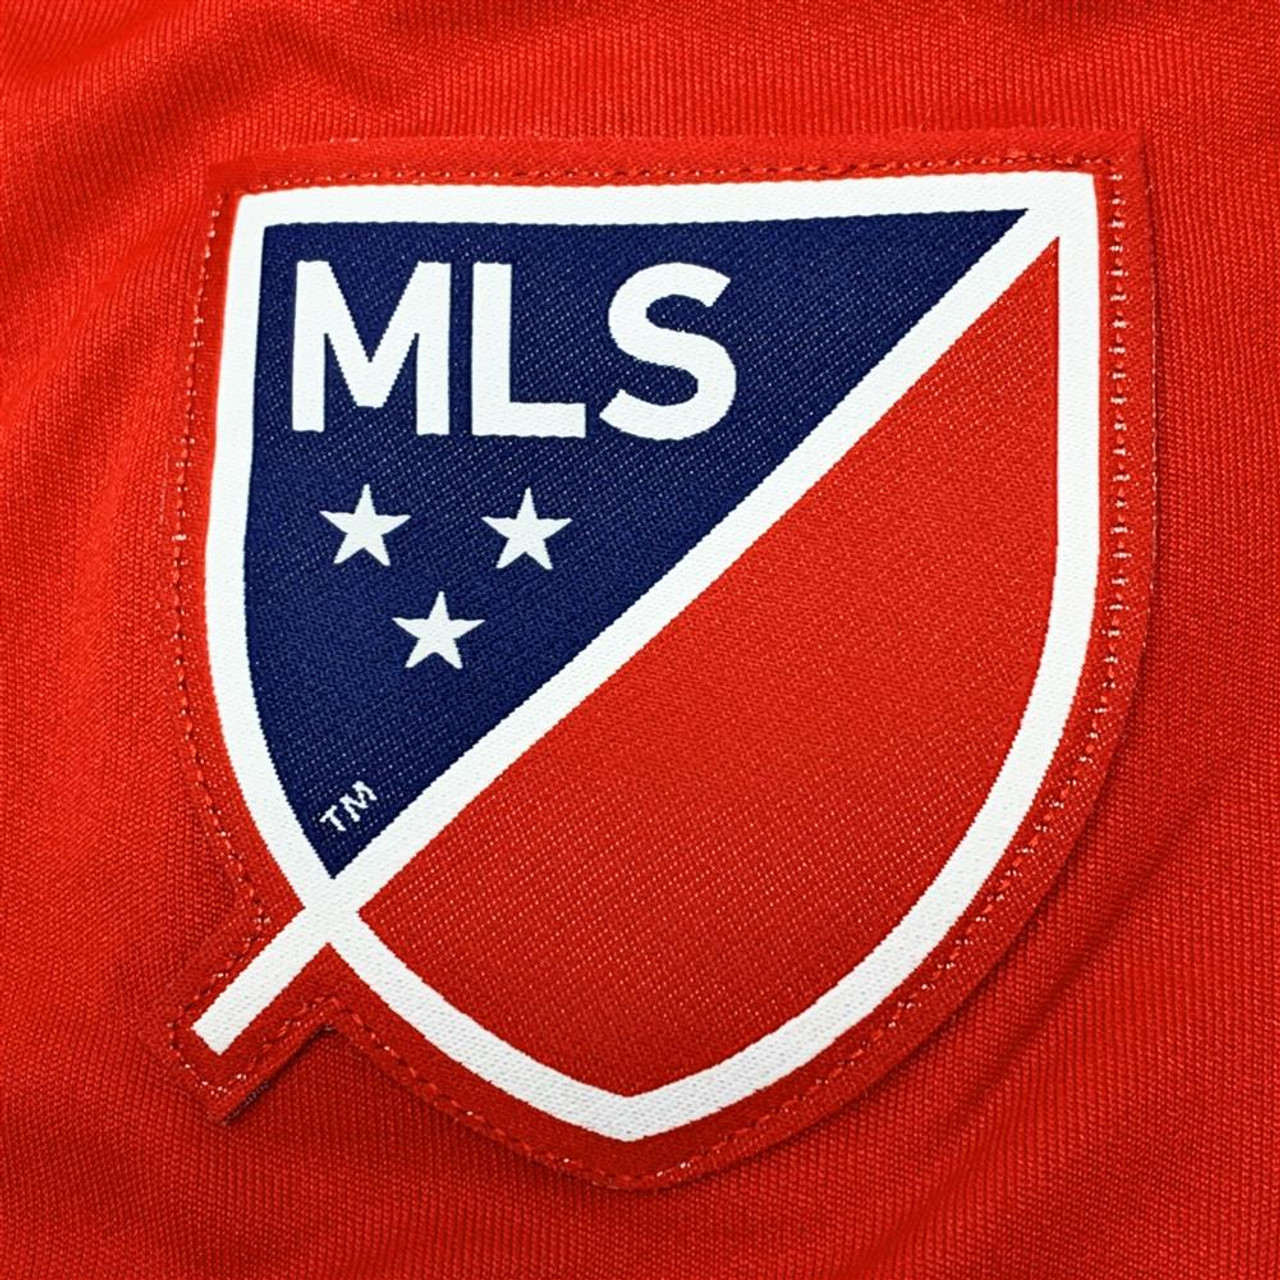 Chicago Fire MLS Performance Replica Jersey by Adidas